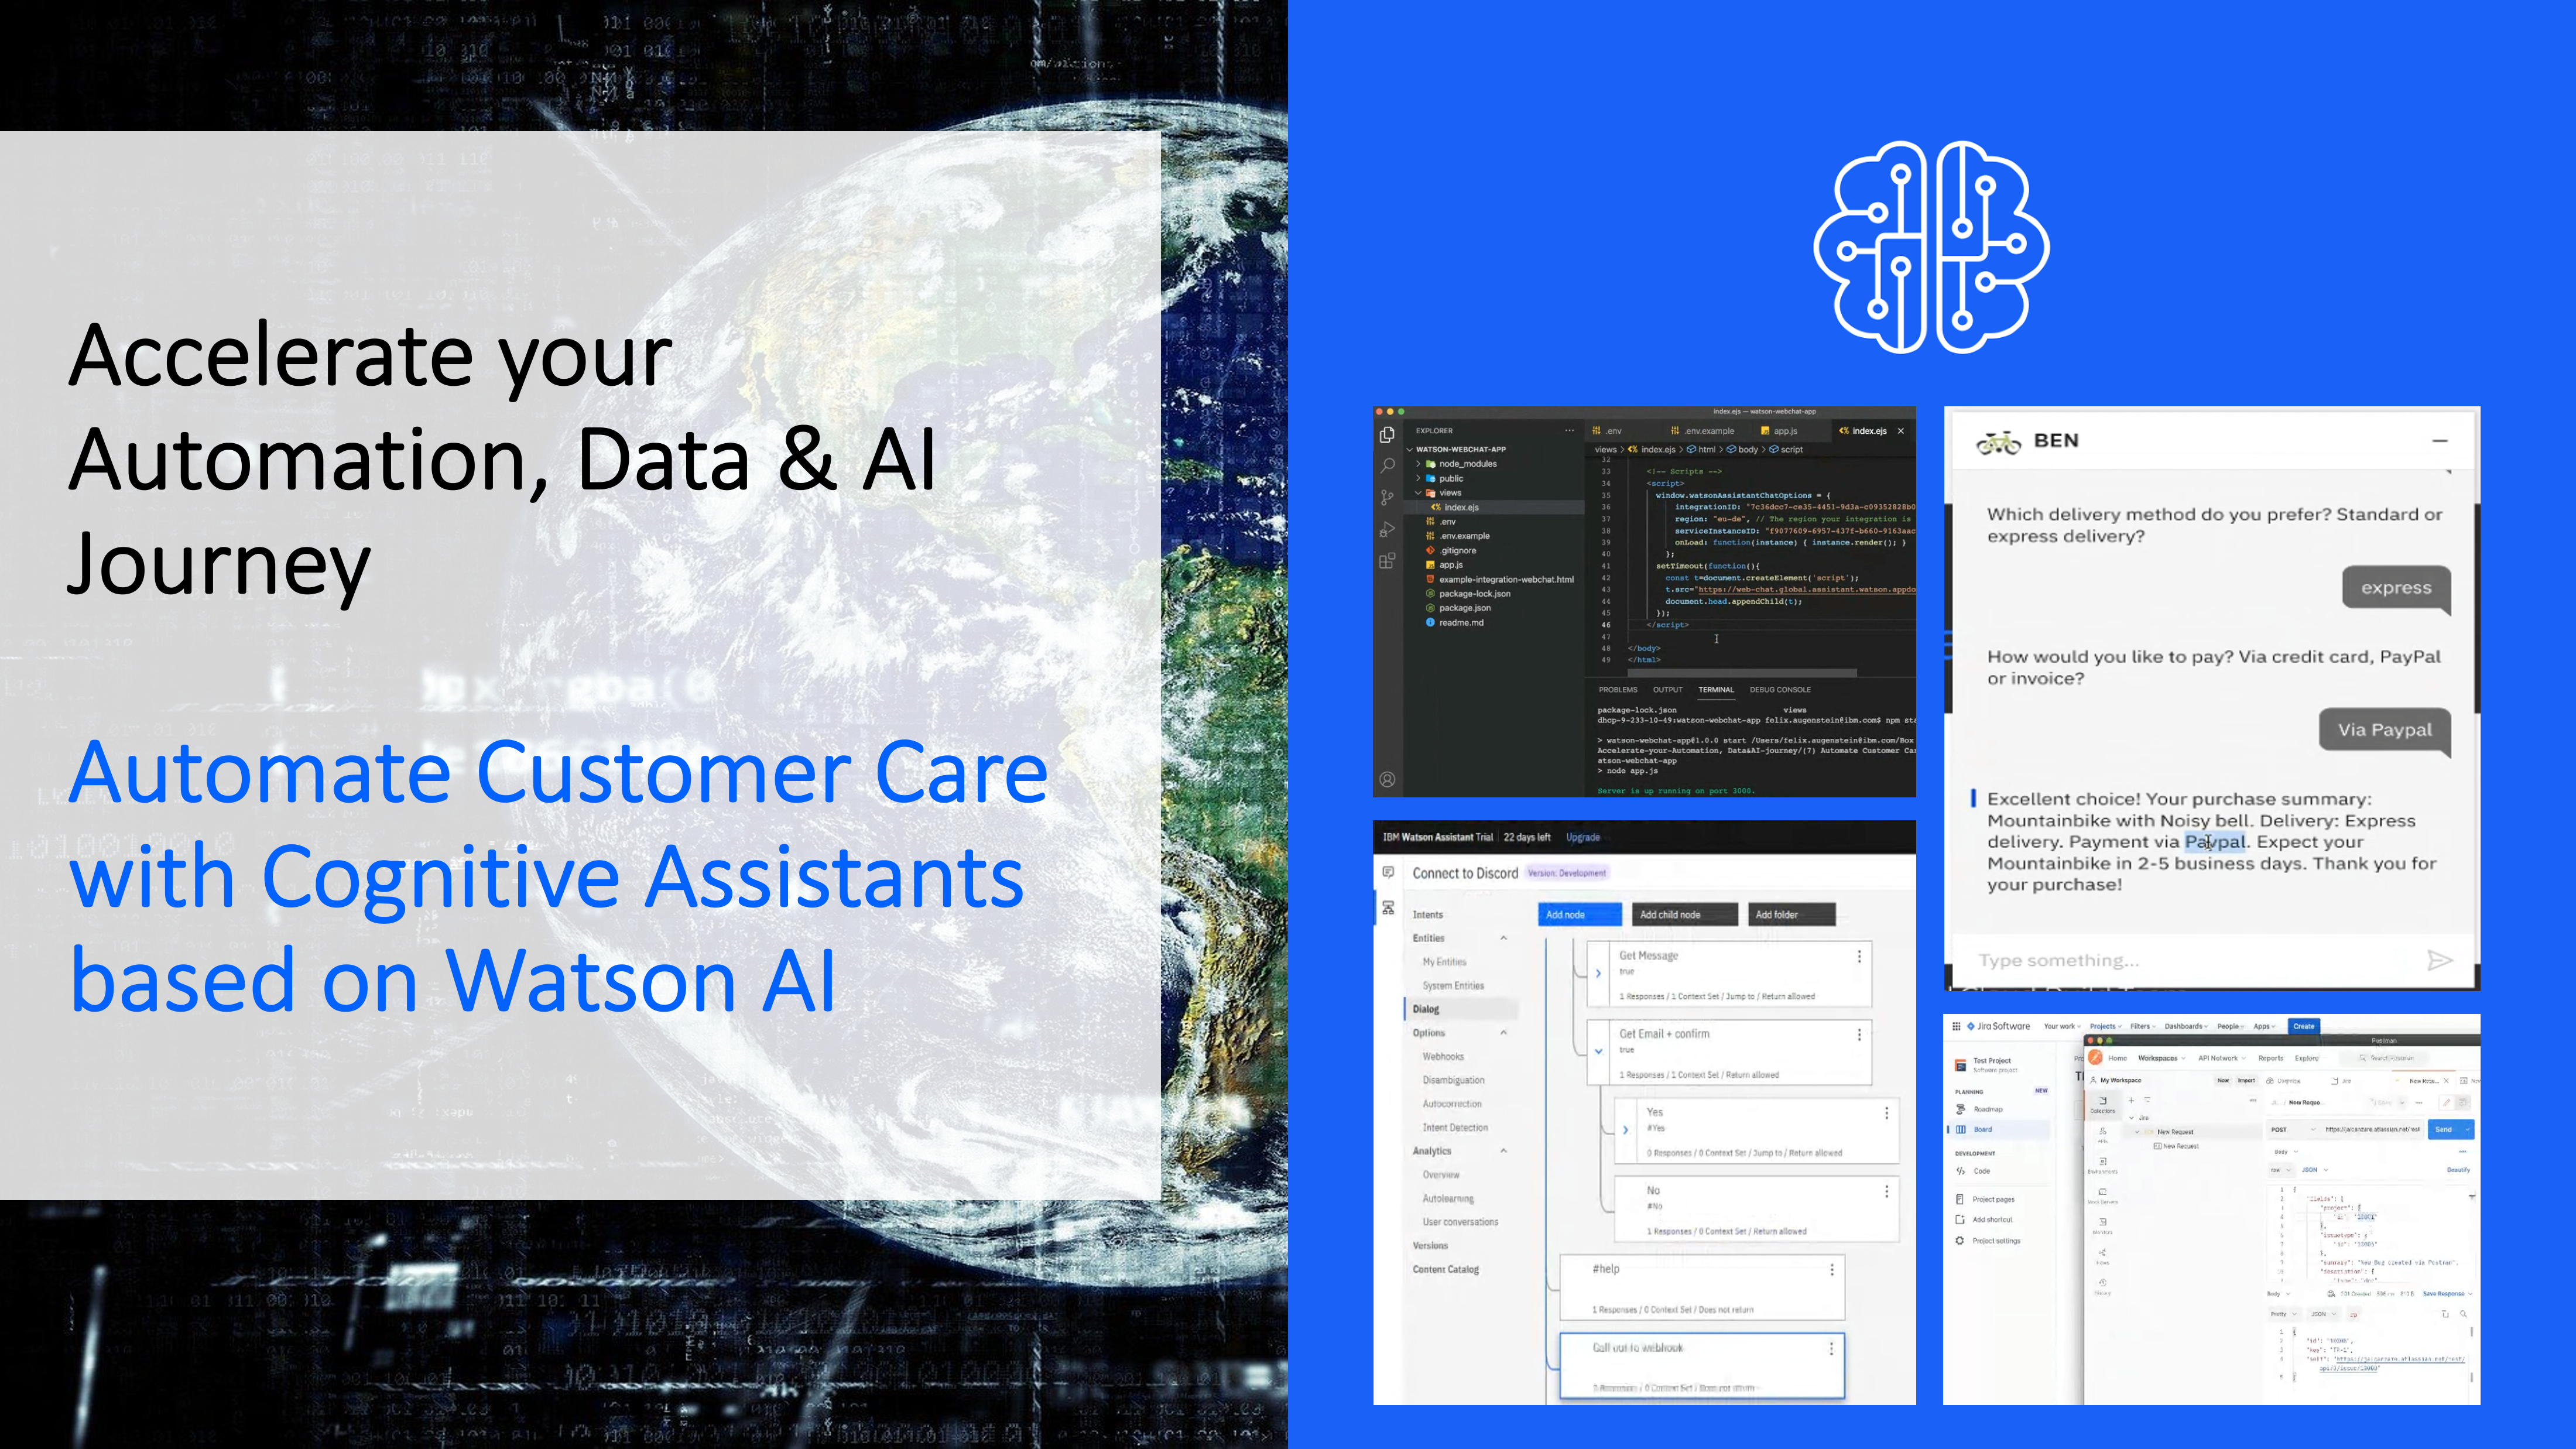 automate-customer-care-with-cognitive-assistants-based-on-watson-ai